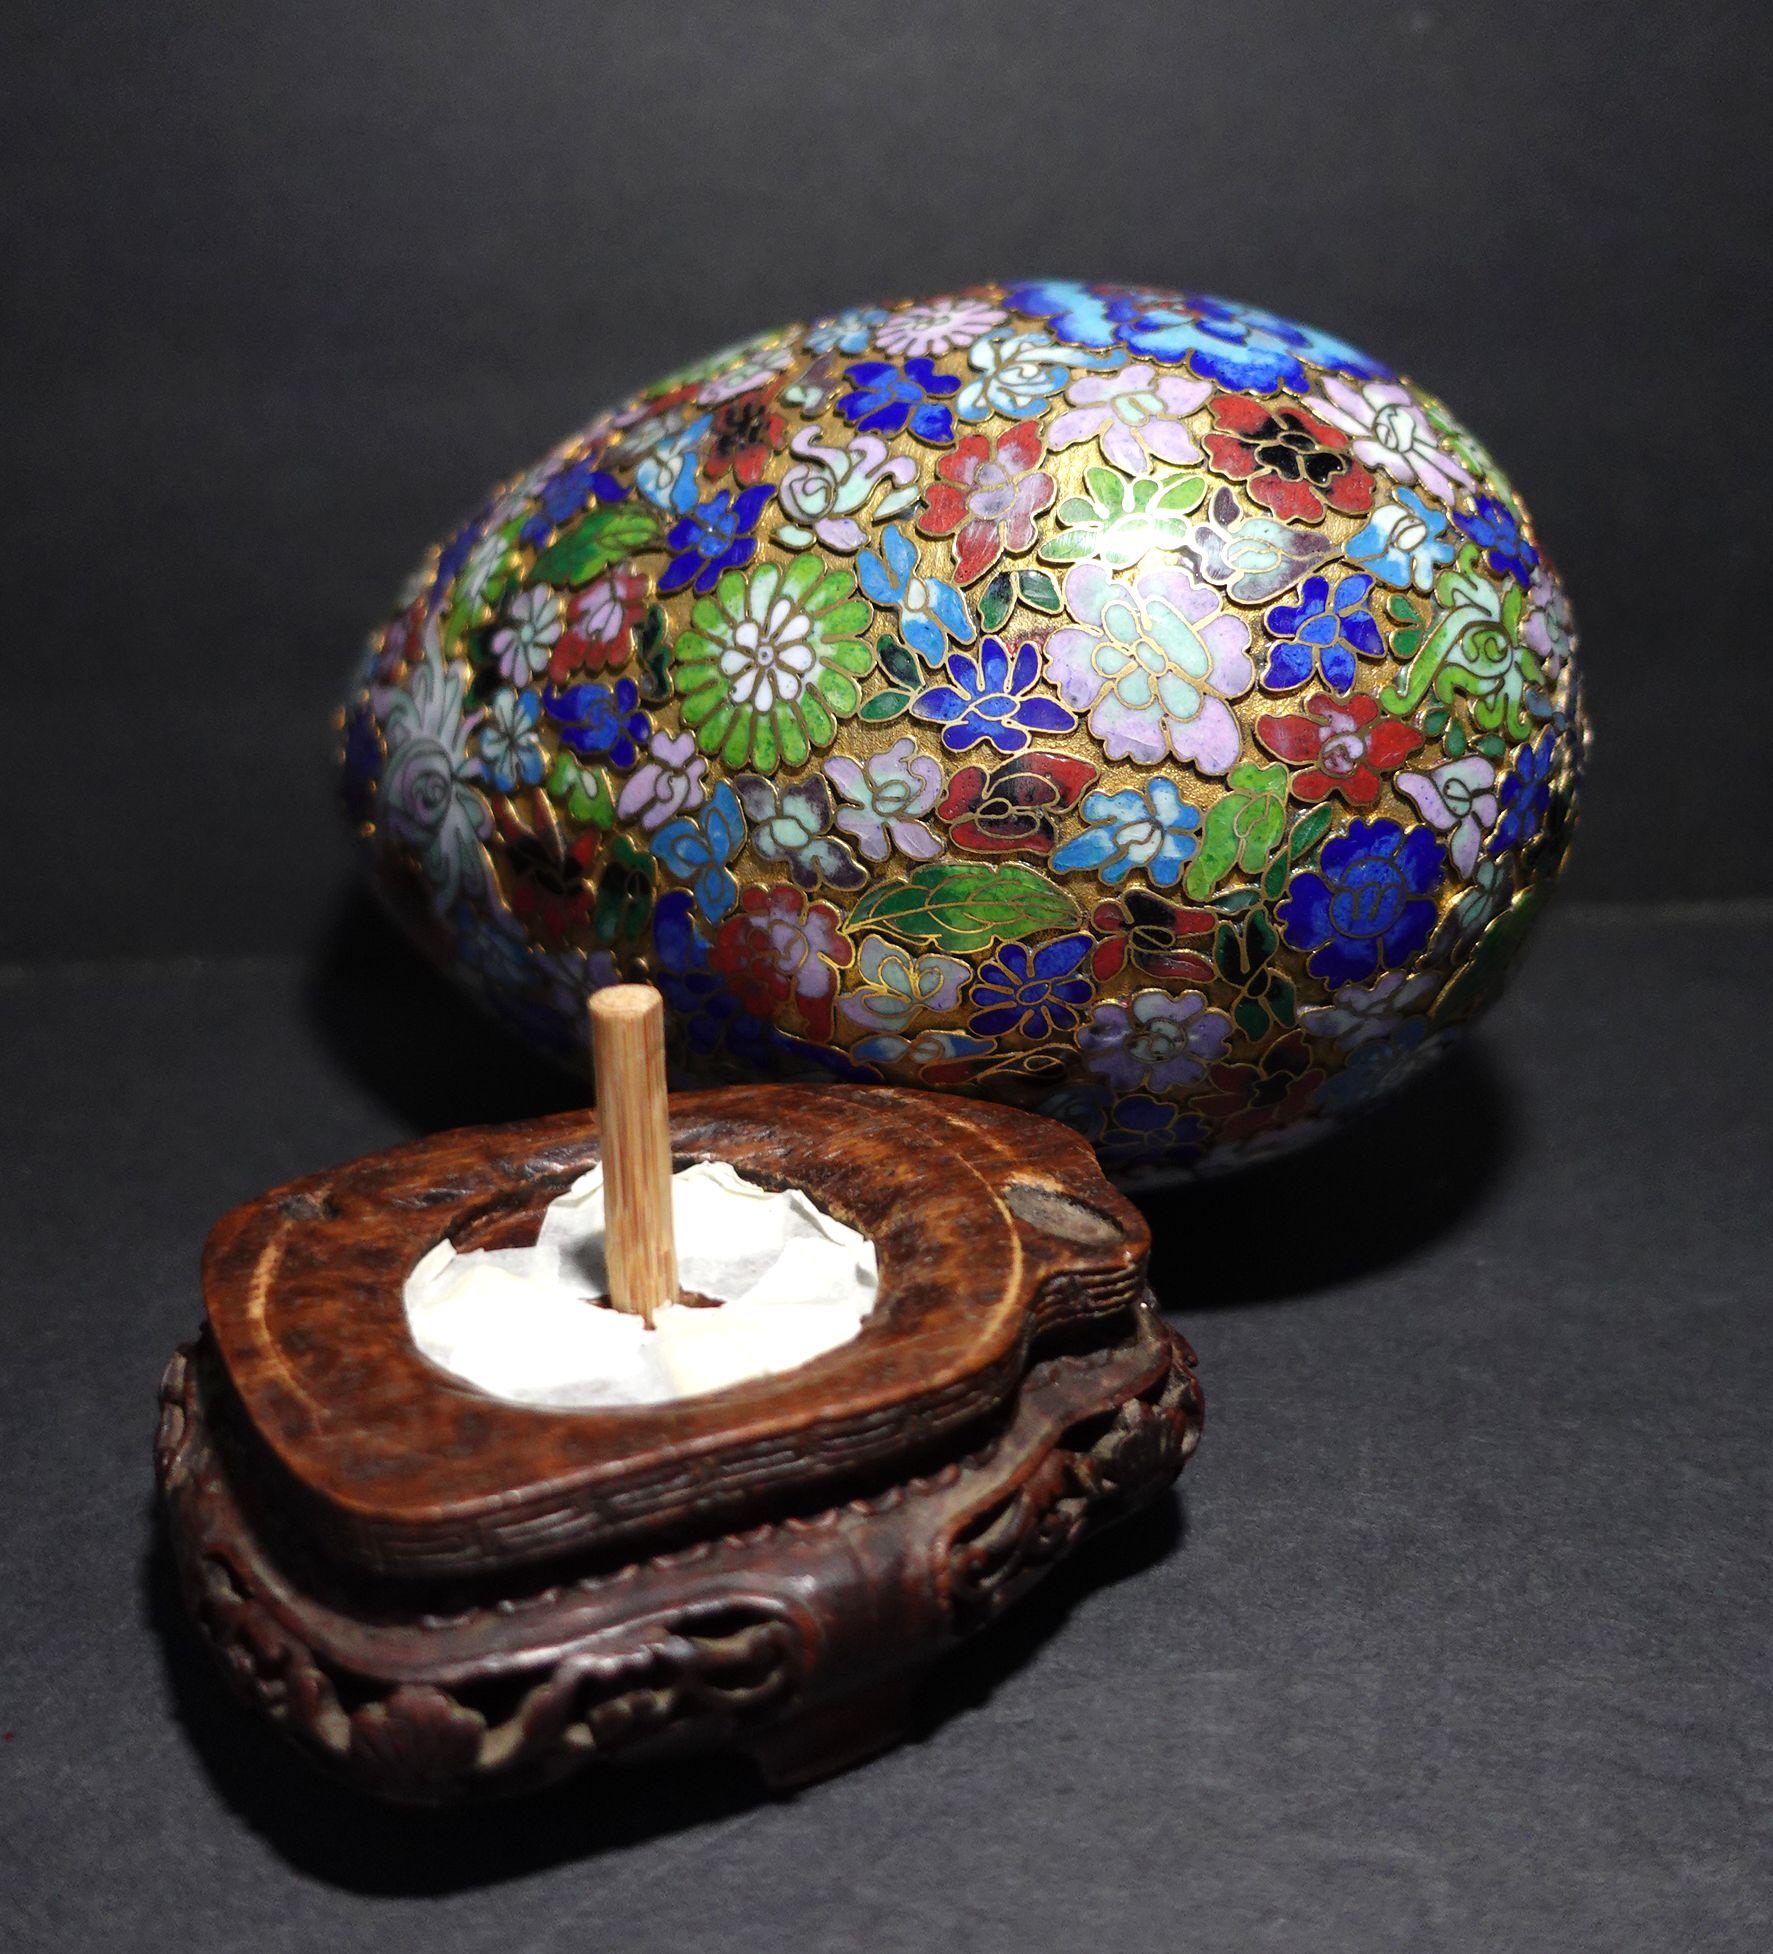 20th Century Chinese Very Large Cloisonné Enamel Egg 